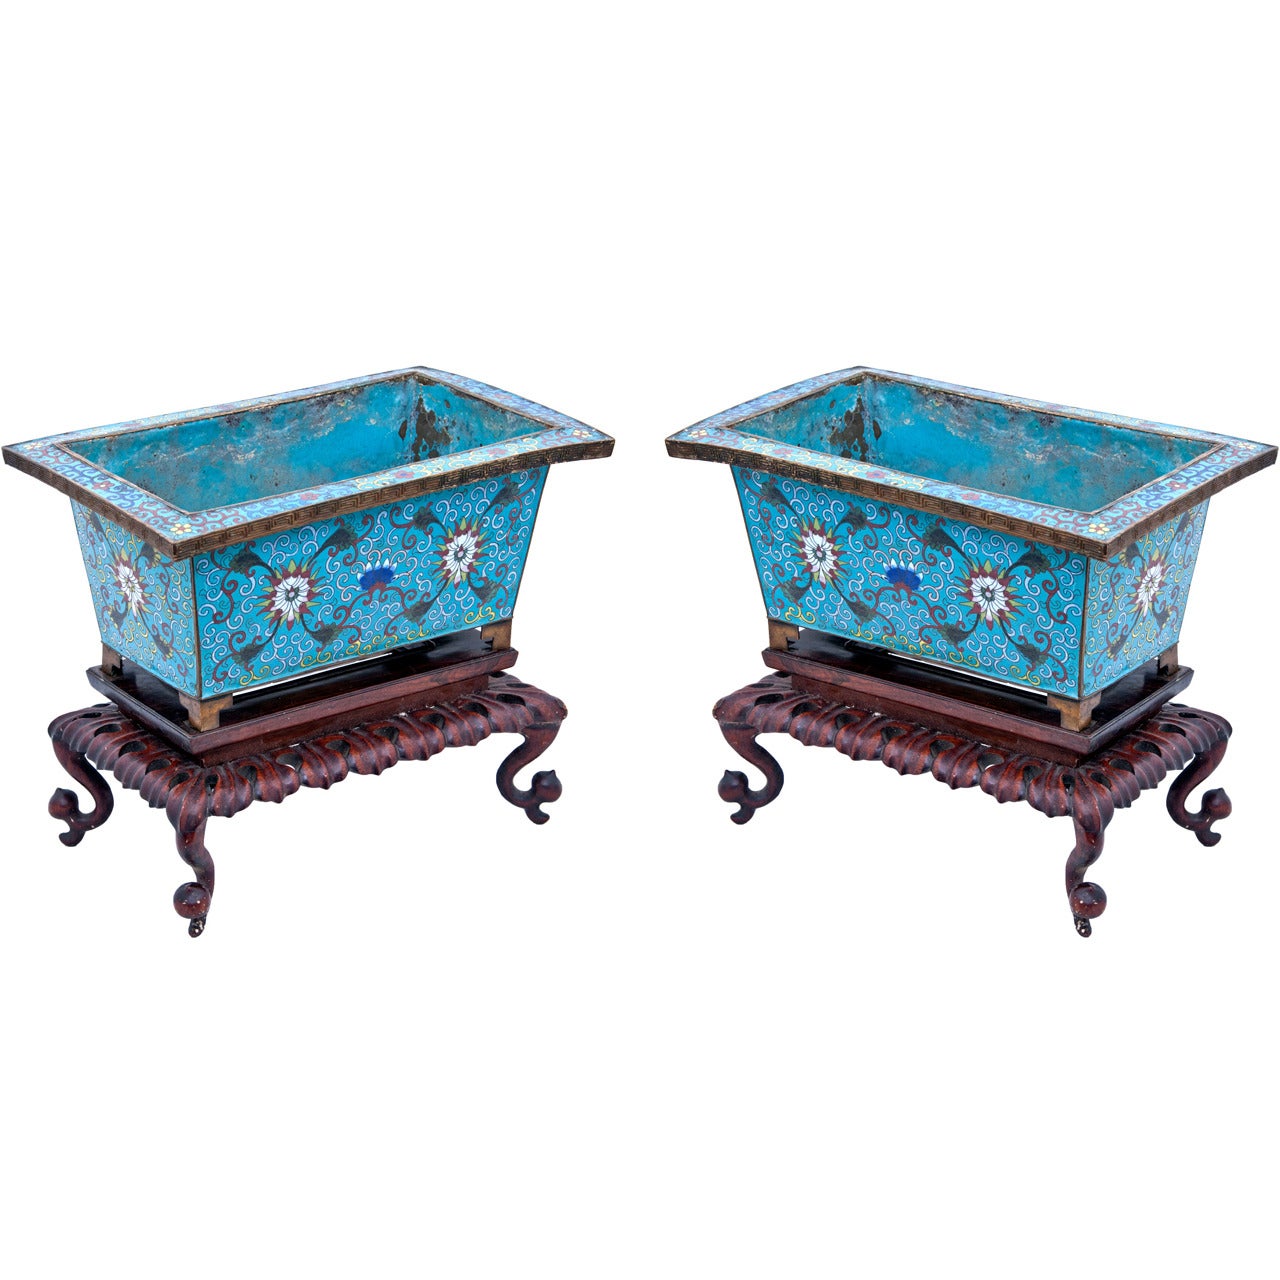 Pair of Republic Period Late Ching Chinese Cloisonne Planters Circa 1900